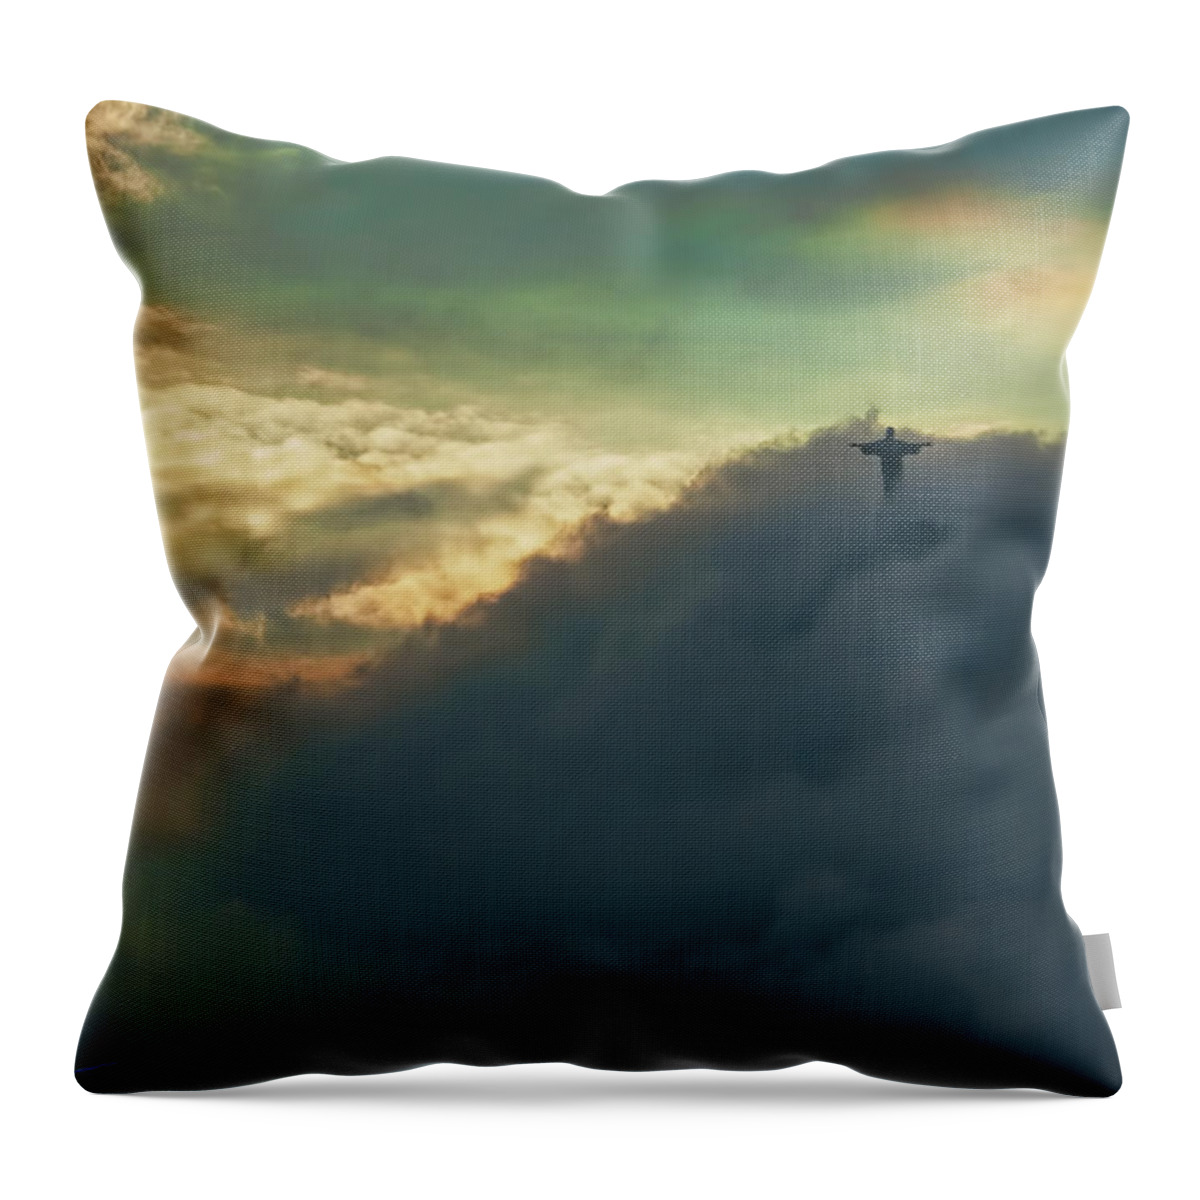 Clouds Throw Pillow featuring the photograph Illusion by S Paul Sahm